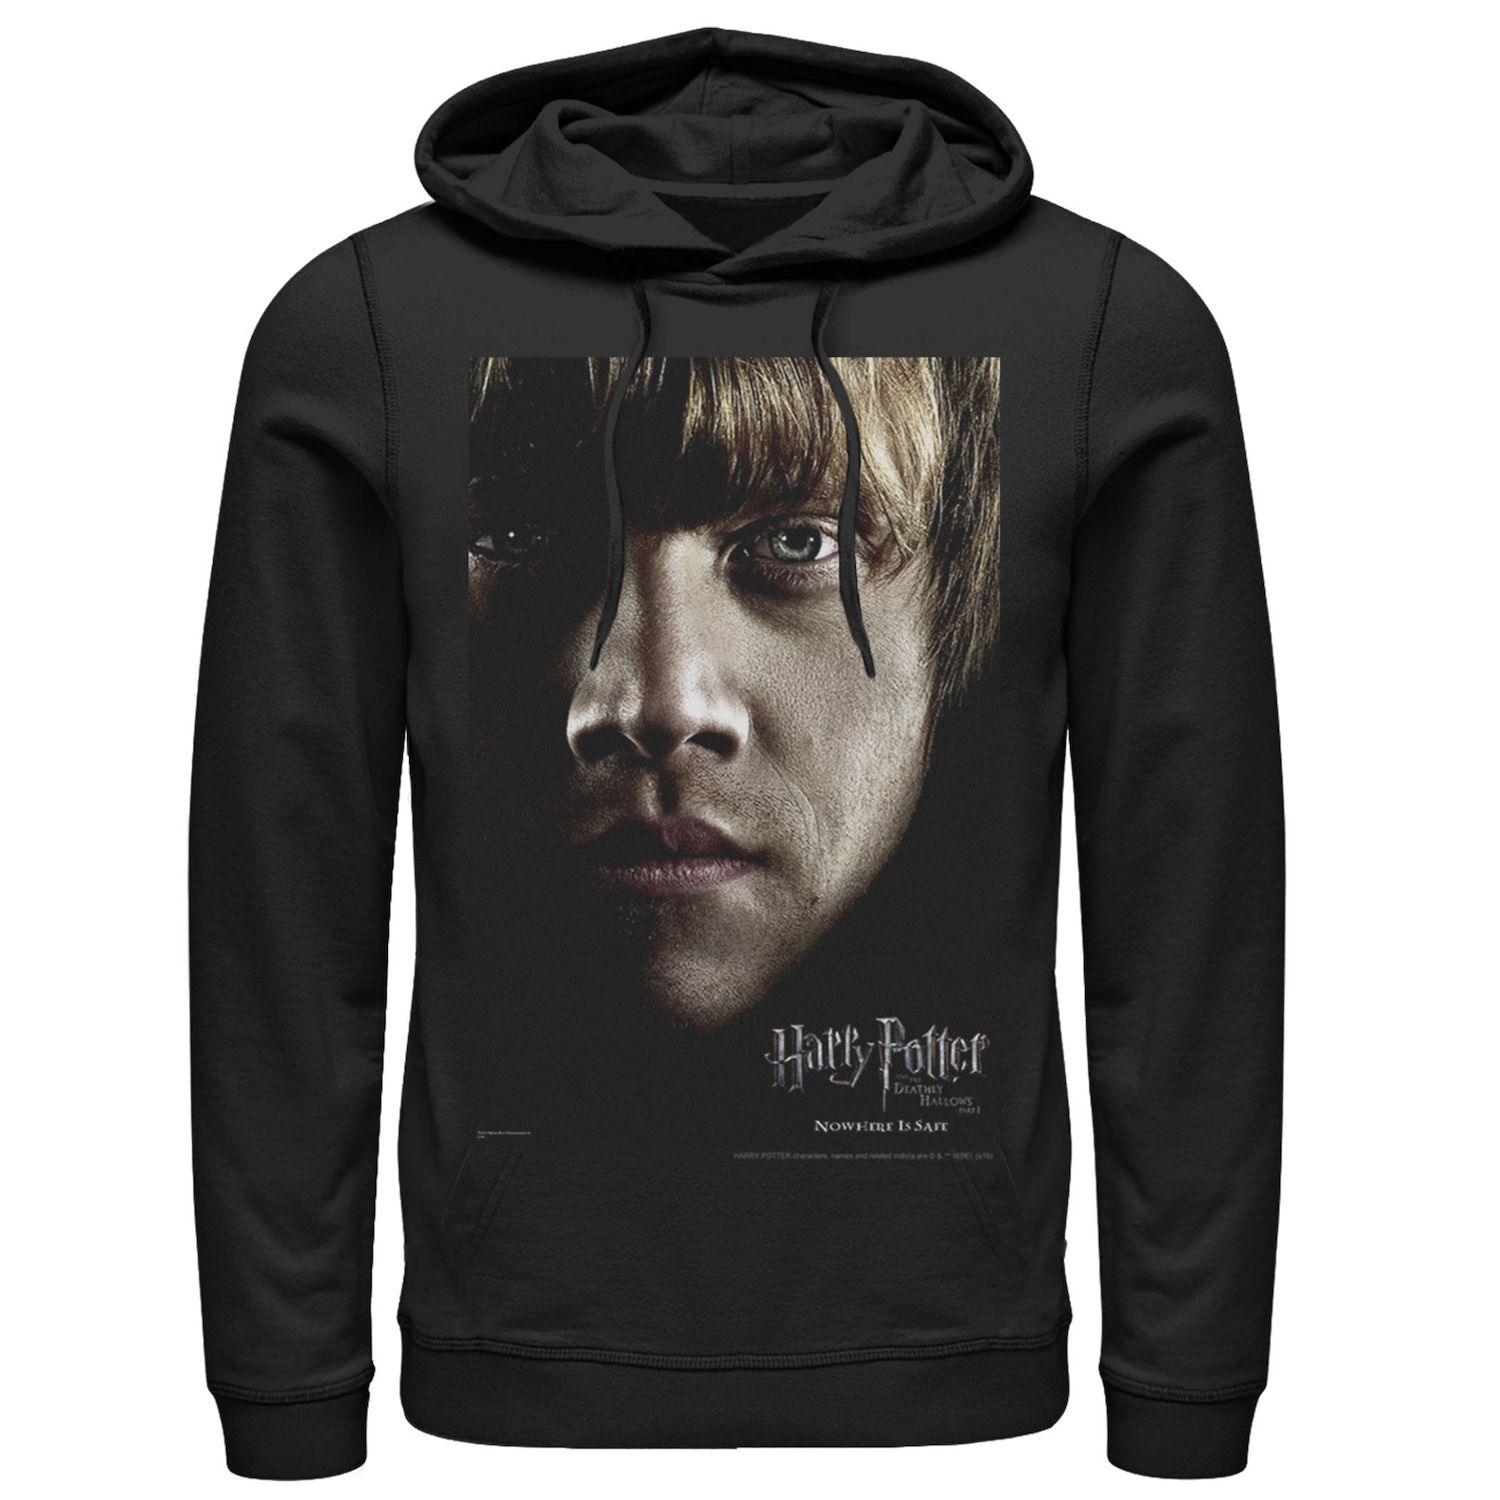 Image for Harry Potter Men's Deathly Hallows Ron Character Poster Graphic Pullover Hoodie at Kohl's.